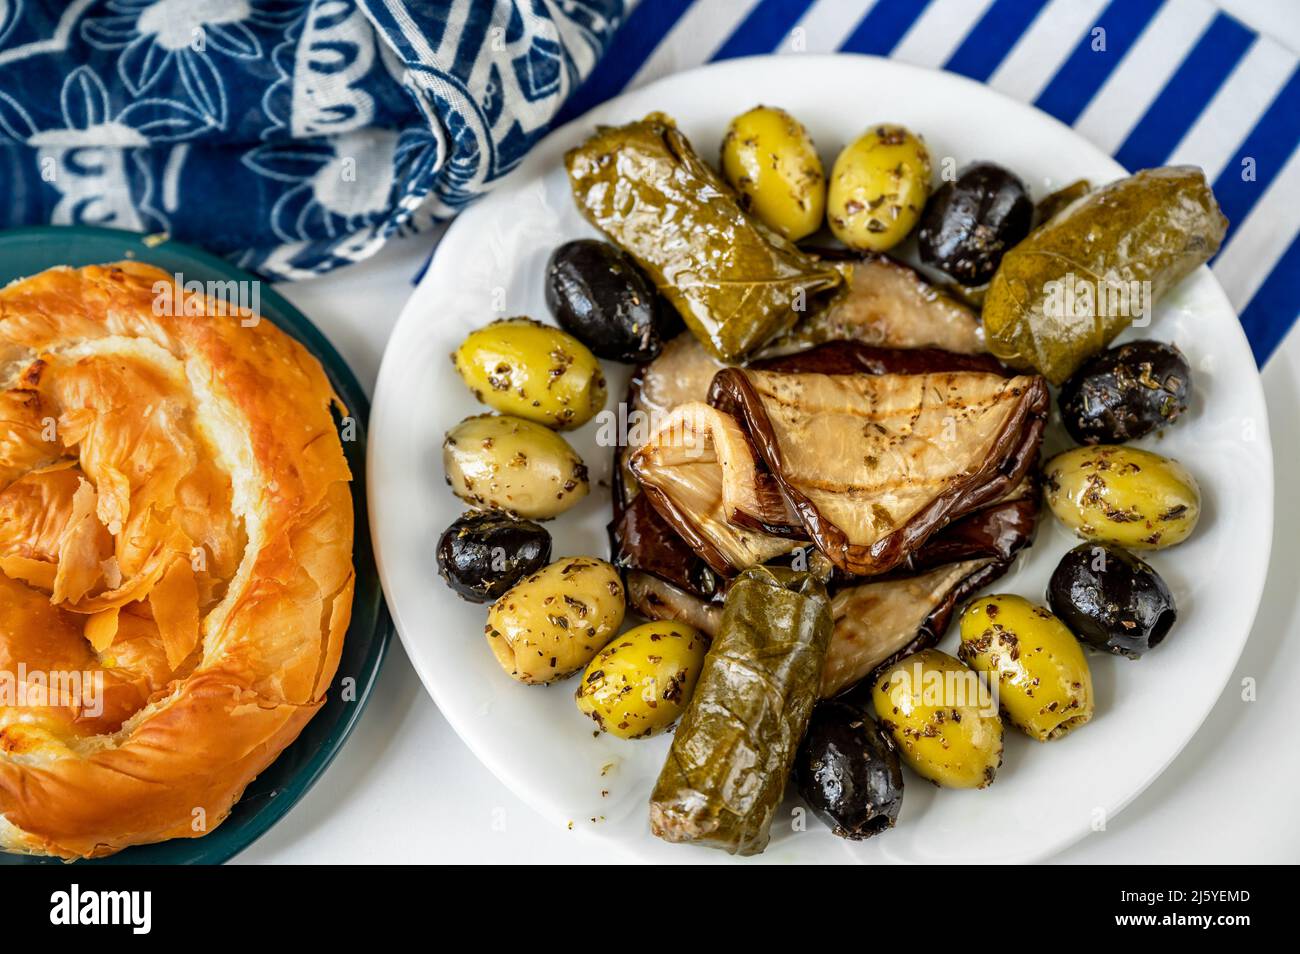 Greek appetizer plate with olive, sliced eggplant and dolmades (vine leaf stuffed with rice), pastry tyropita with cheese, closeup. Stock Photo